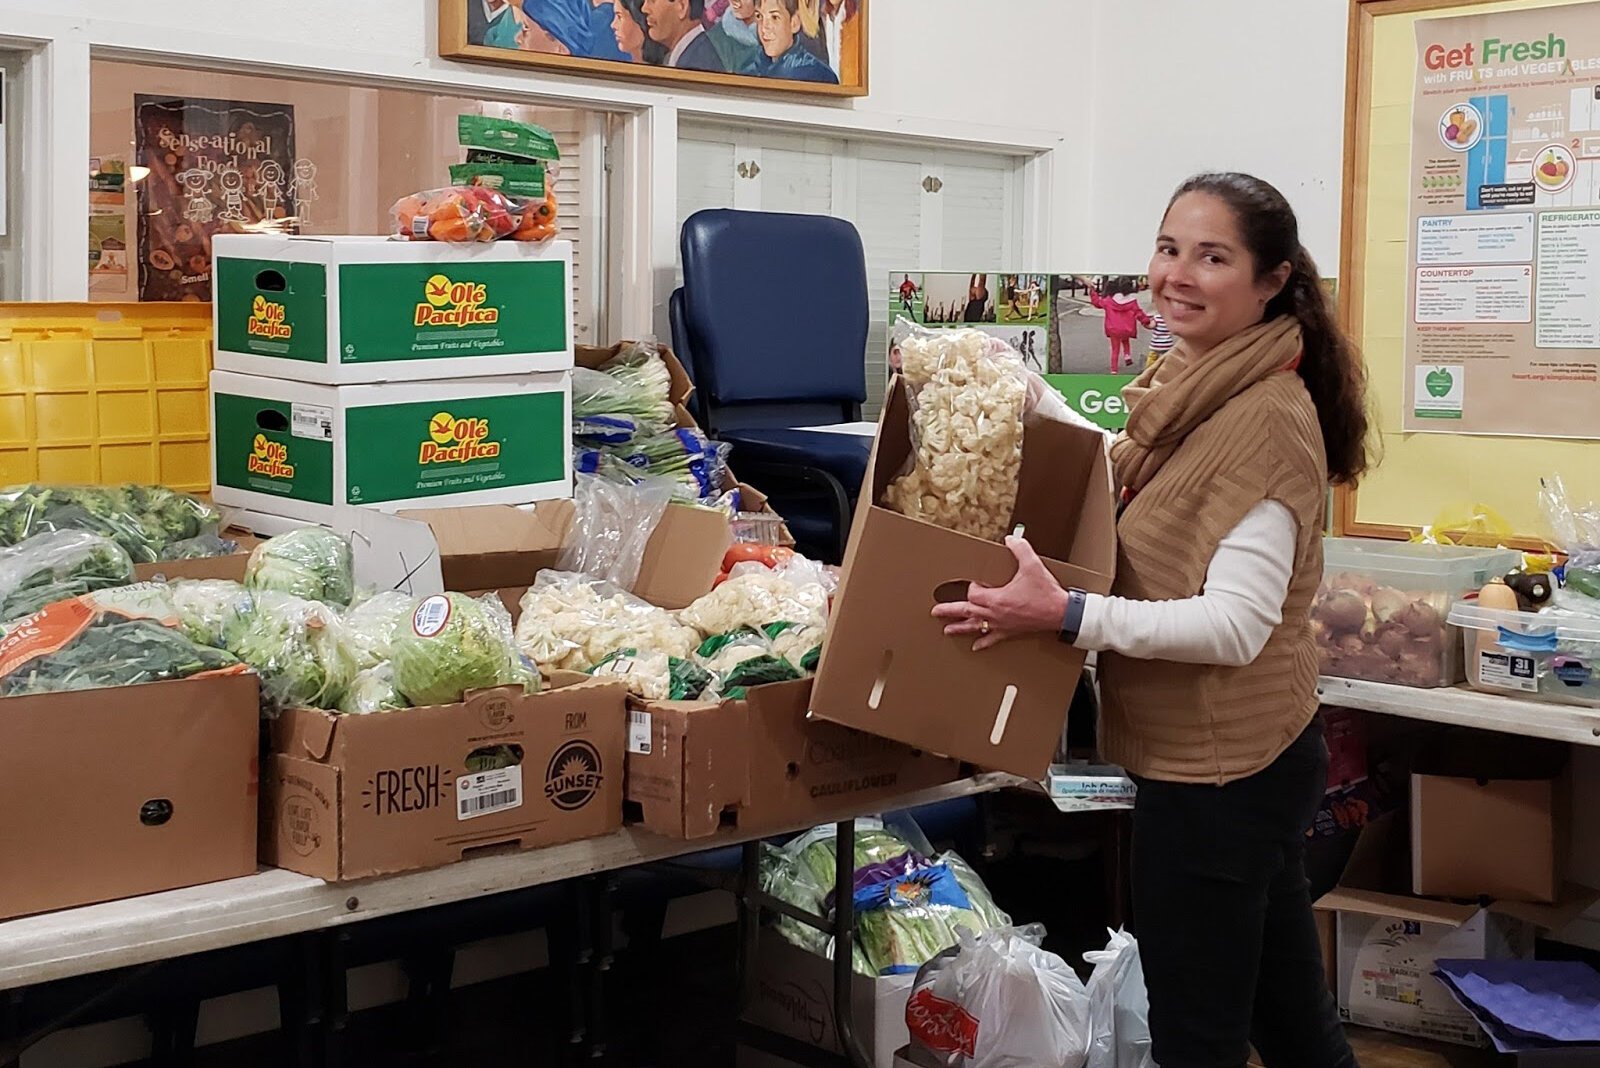 SR2H member Lisa Lewis is based out of Wyoming, Michigan, with United Church Outreach Ministry (UCOM), where she's been leading virtual Health Through Literacy programming and assists with distributing fresh produce in the community.  